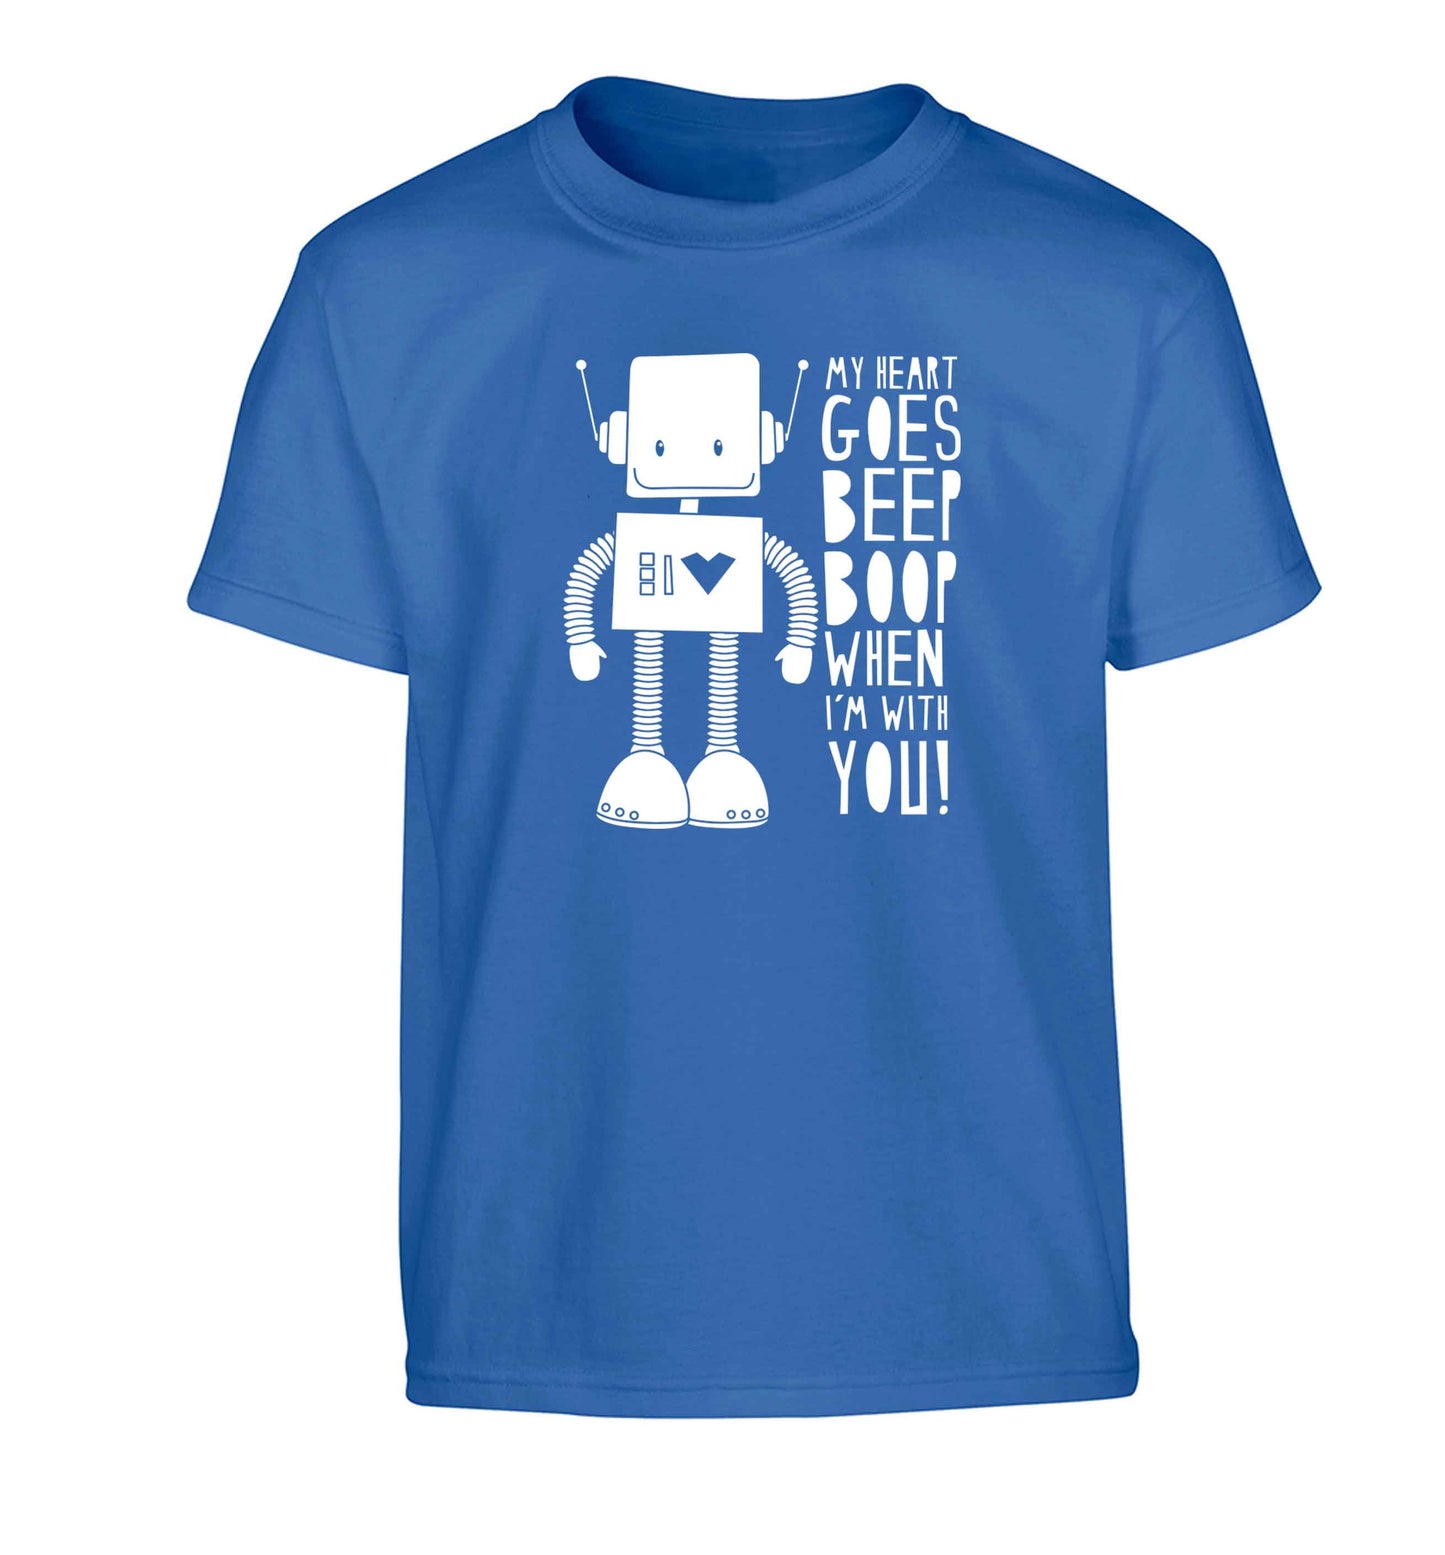 My heart goes beep boop when I'm with you Children's blue Tshirt 12-13 Years